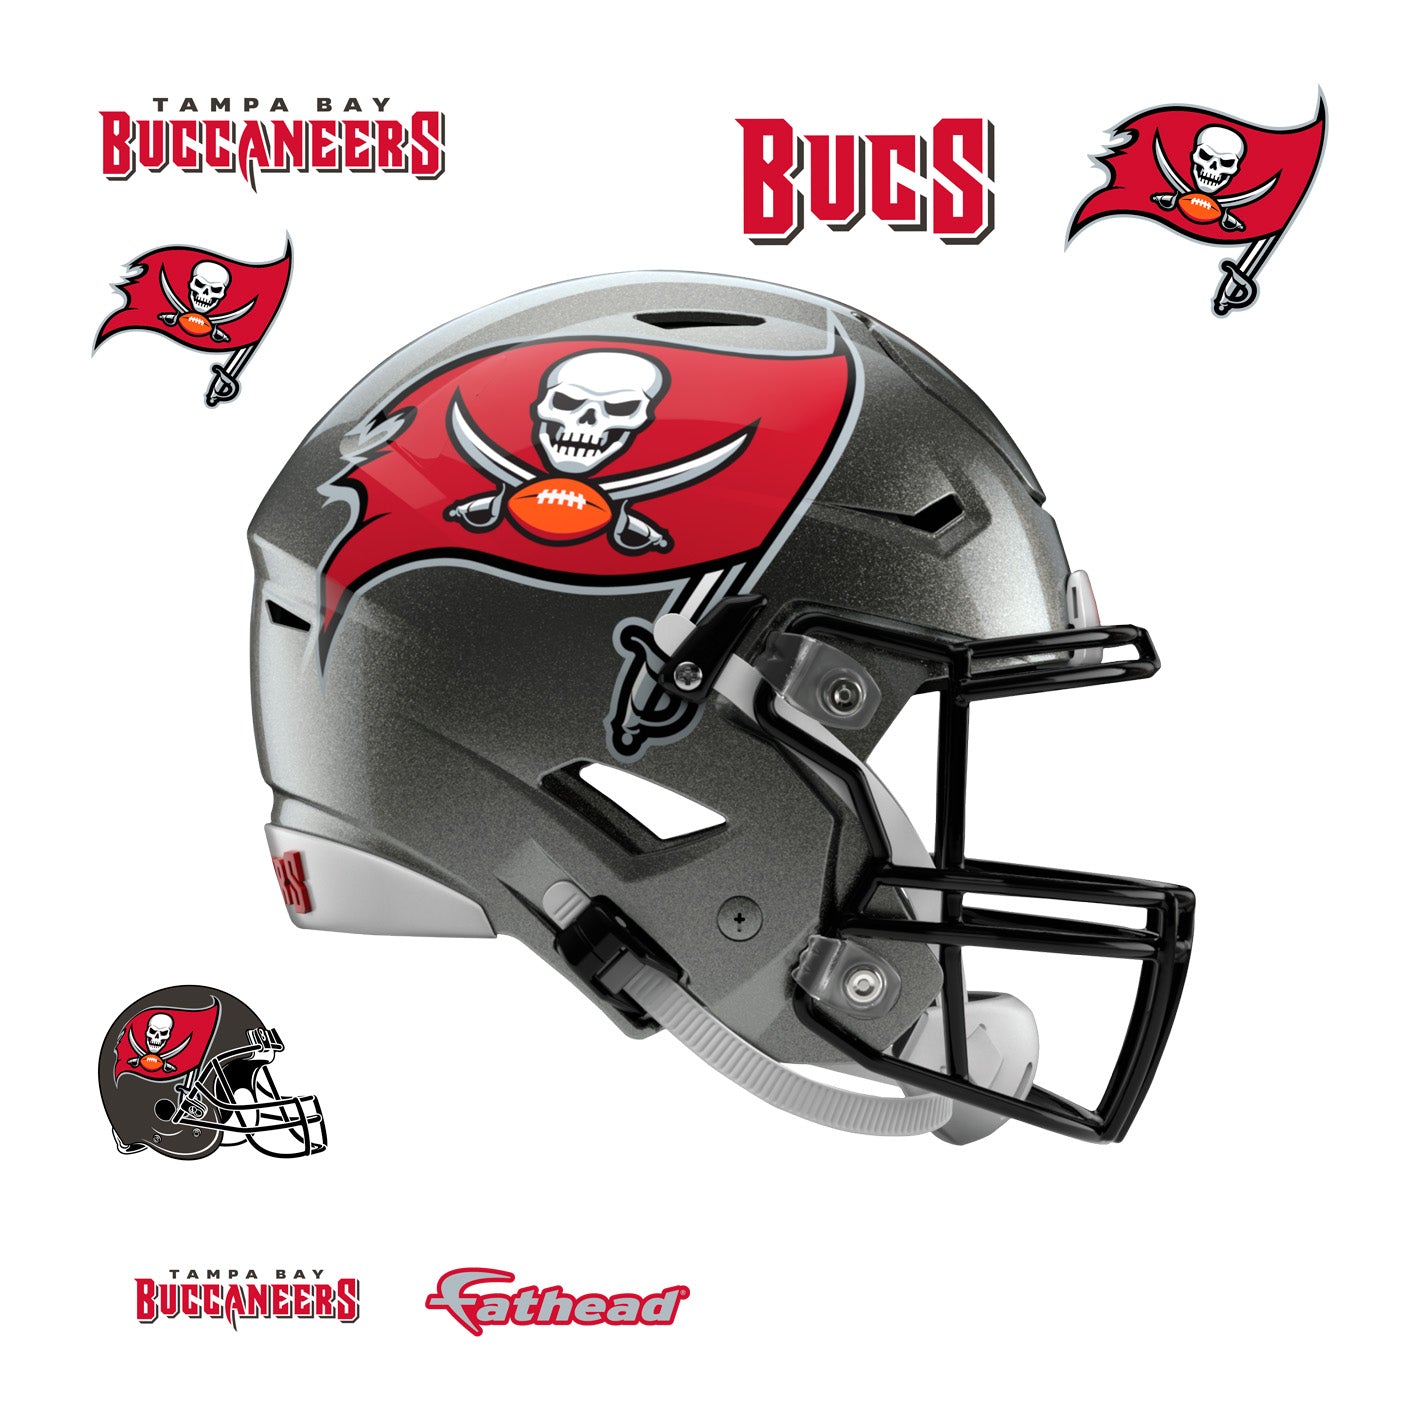 Tampa Bay Buccaneers: 2022 Helmet - Officially Licensed NFL Removable  Adhesive Decal